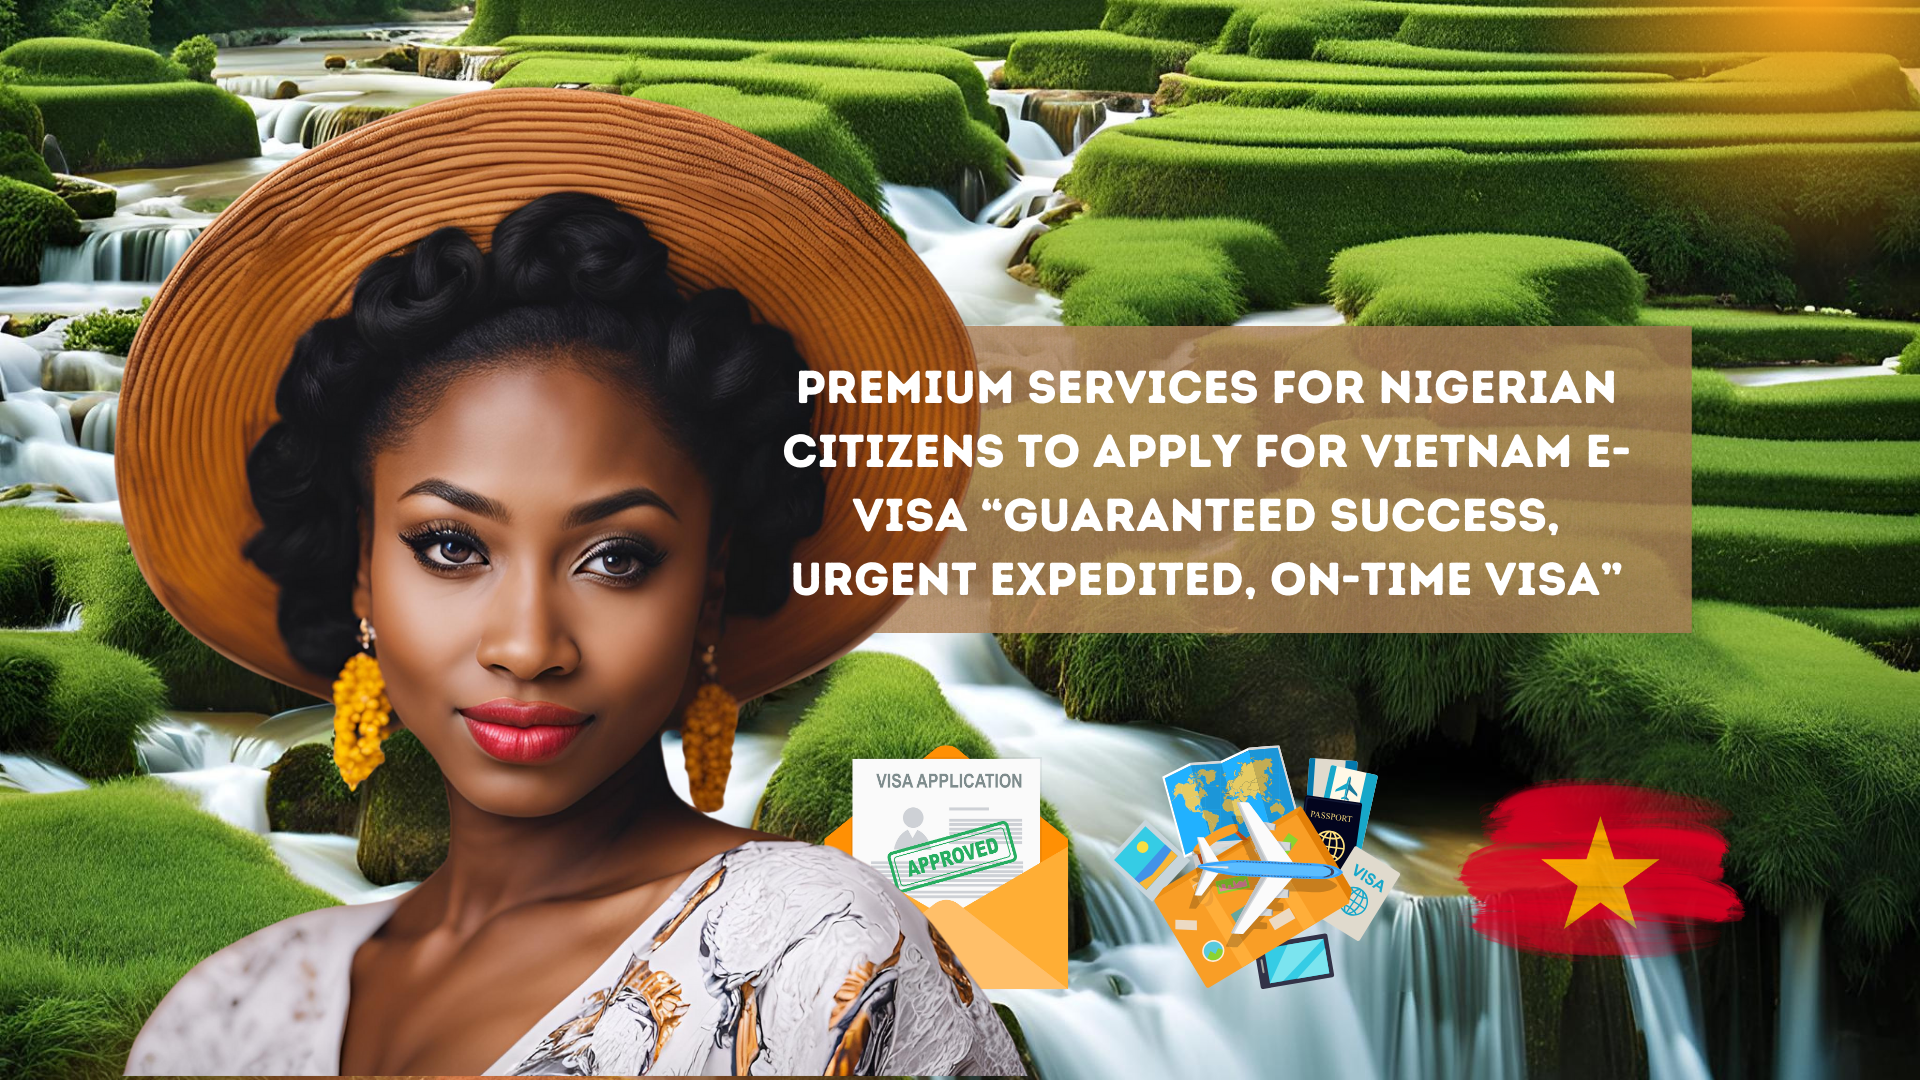 Premium Services for Nigerian Citizens to apply for Vietnam e-visa “Guaranteed success, urgent expedited, on-time visa”